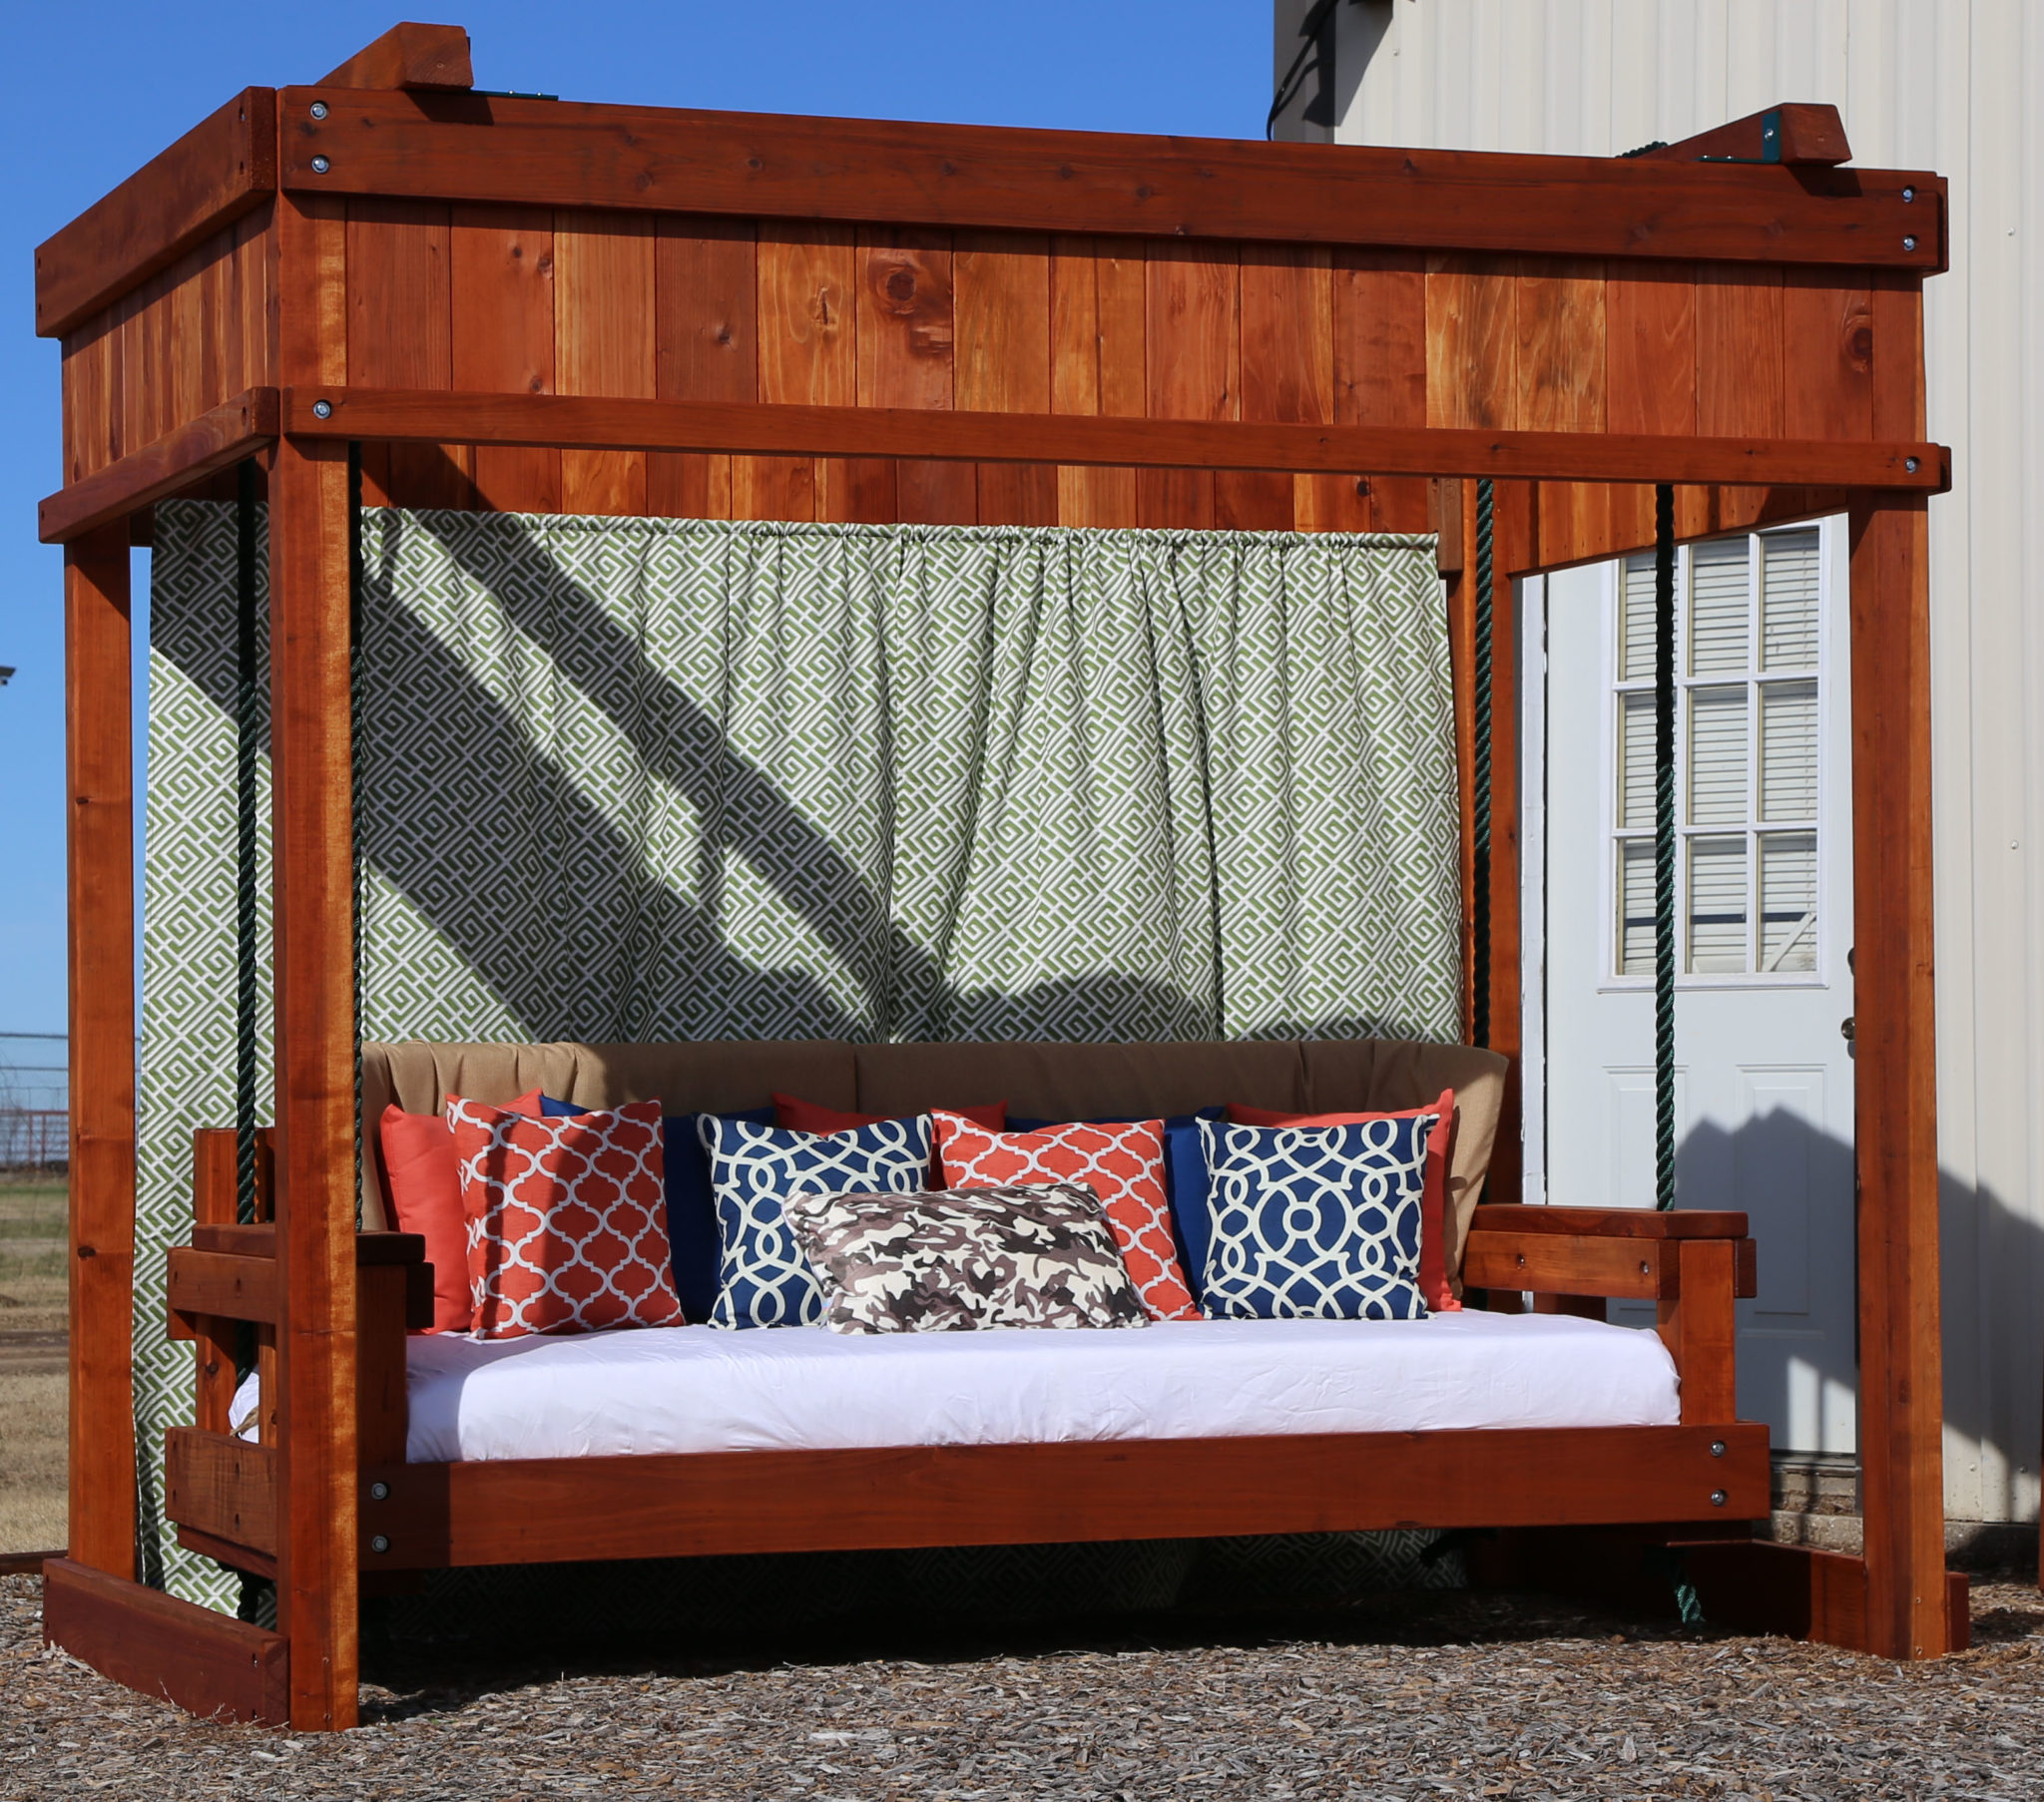 outdoor day bed swing, swinging bed, day bed, lounger, outdoor bed, patio furniture, porch furniture, outdoor furniture, daybed swing, day bed, outdoor living space, outdoor swing